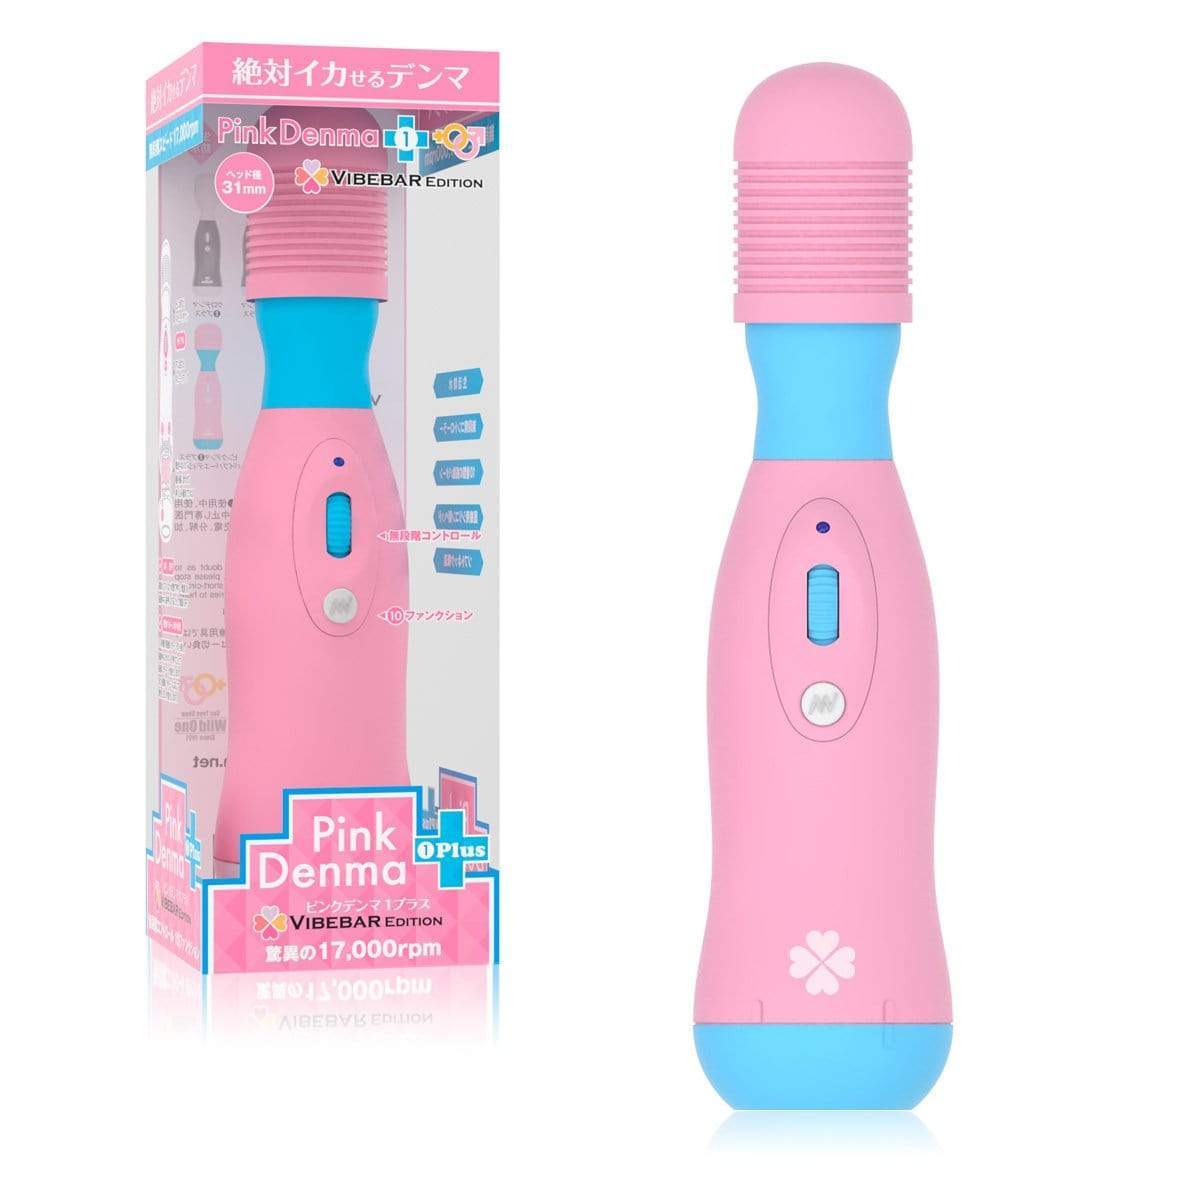 Wild One - Pink Denma 1 Plus Vibebar Edition Wand Massager (Pink) -  Wand Massagers (Vibration) Non Rechargeable  Durio.sg